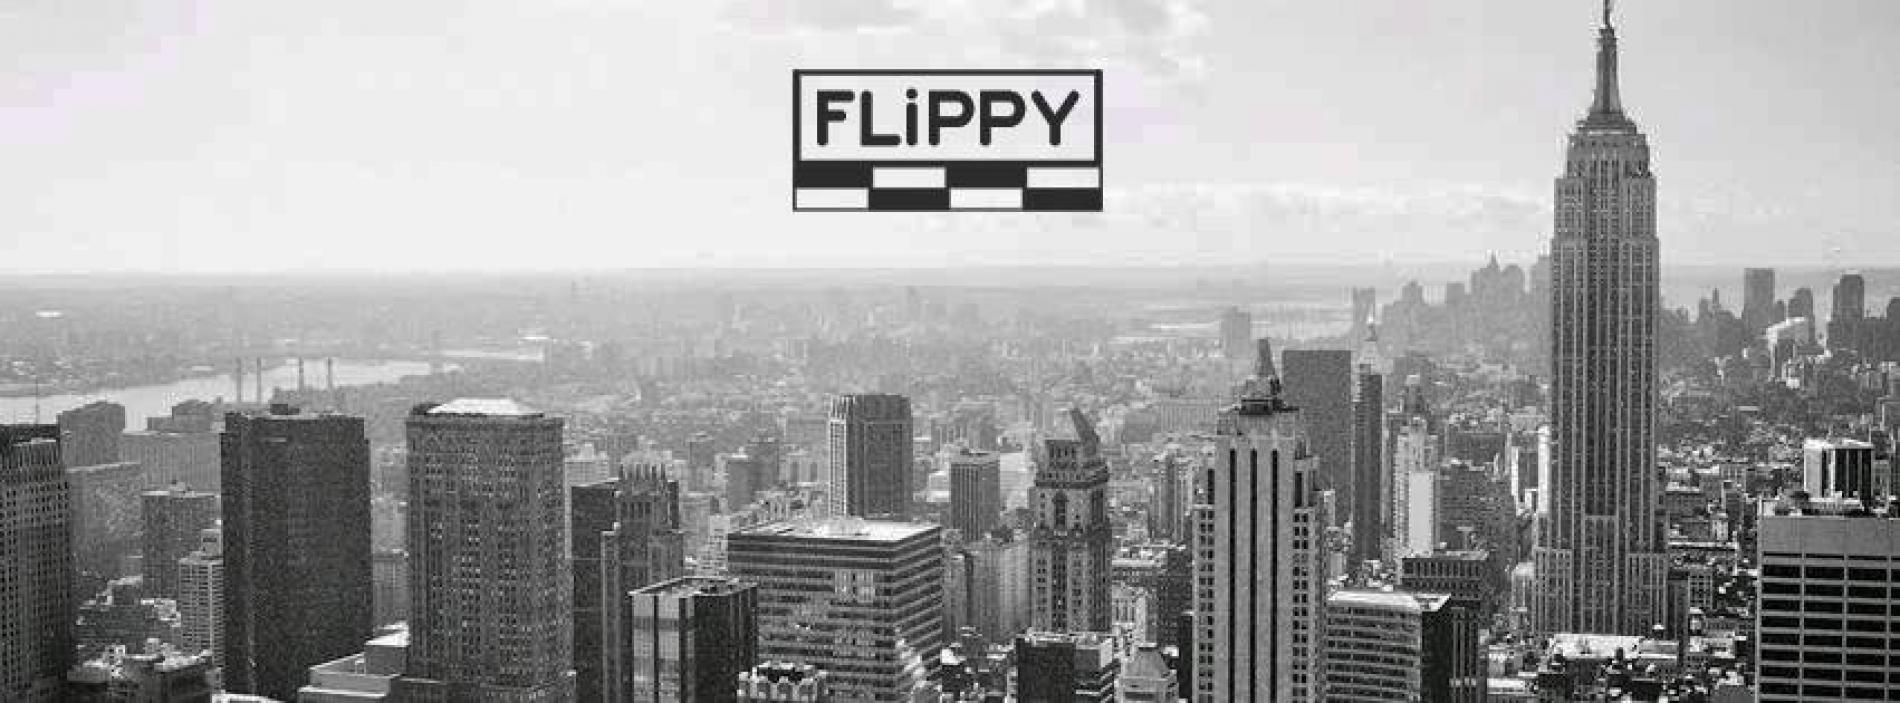 Flippy Teases A New Track